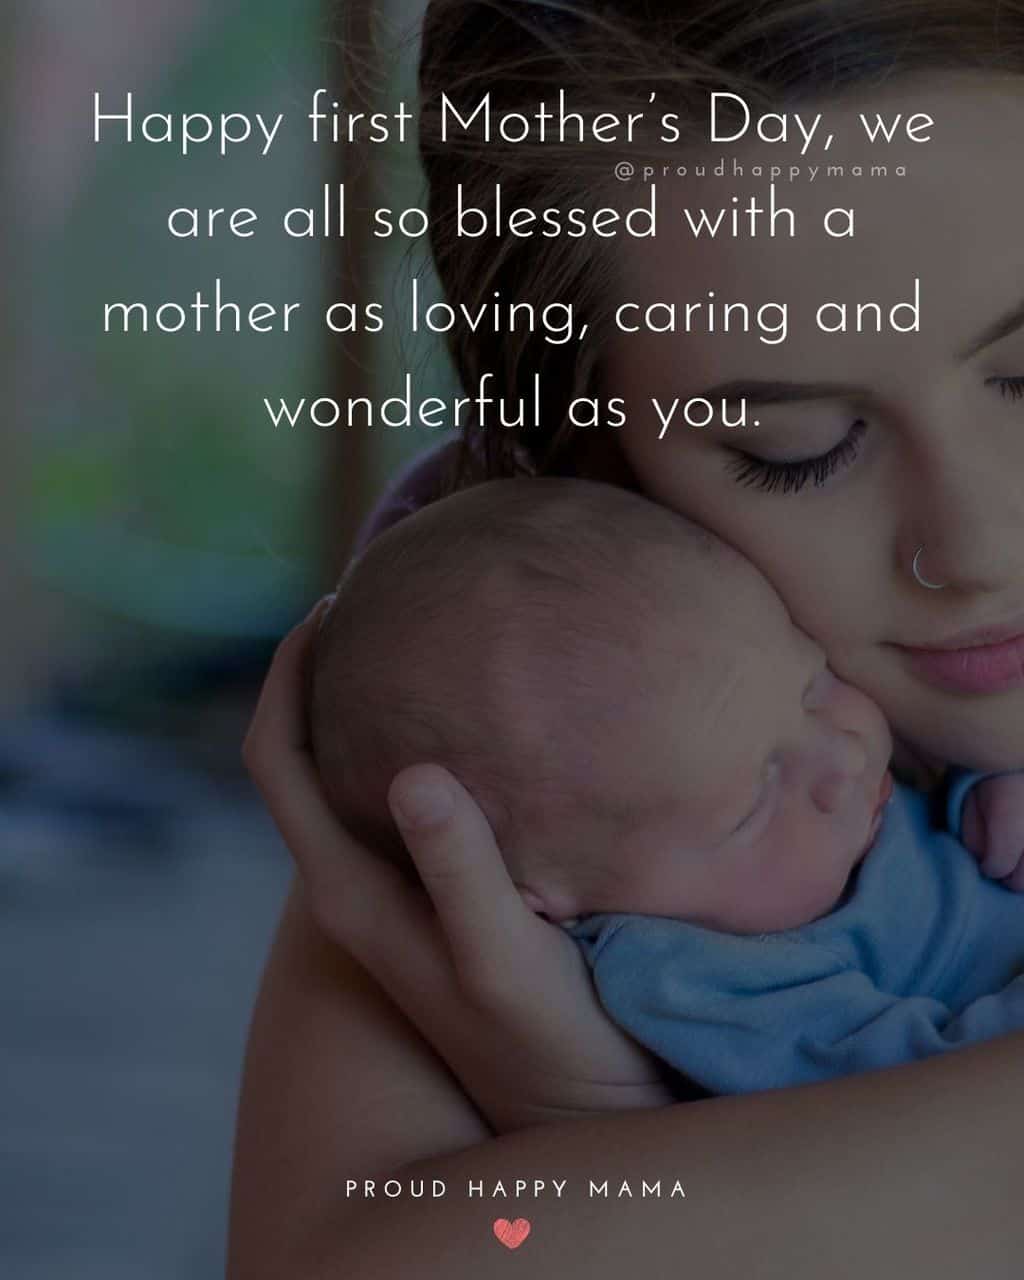 First Mothers Day Quotes - Happy first Mother’s Day, we are all so blessed with a mother as loving, caring and wonderful as you.’